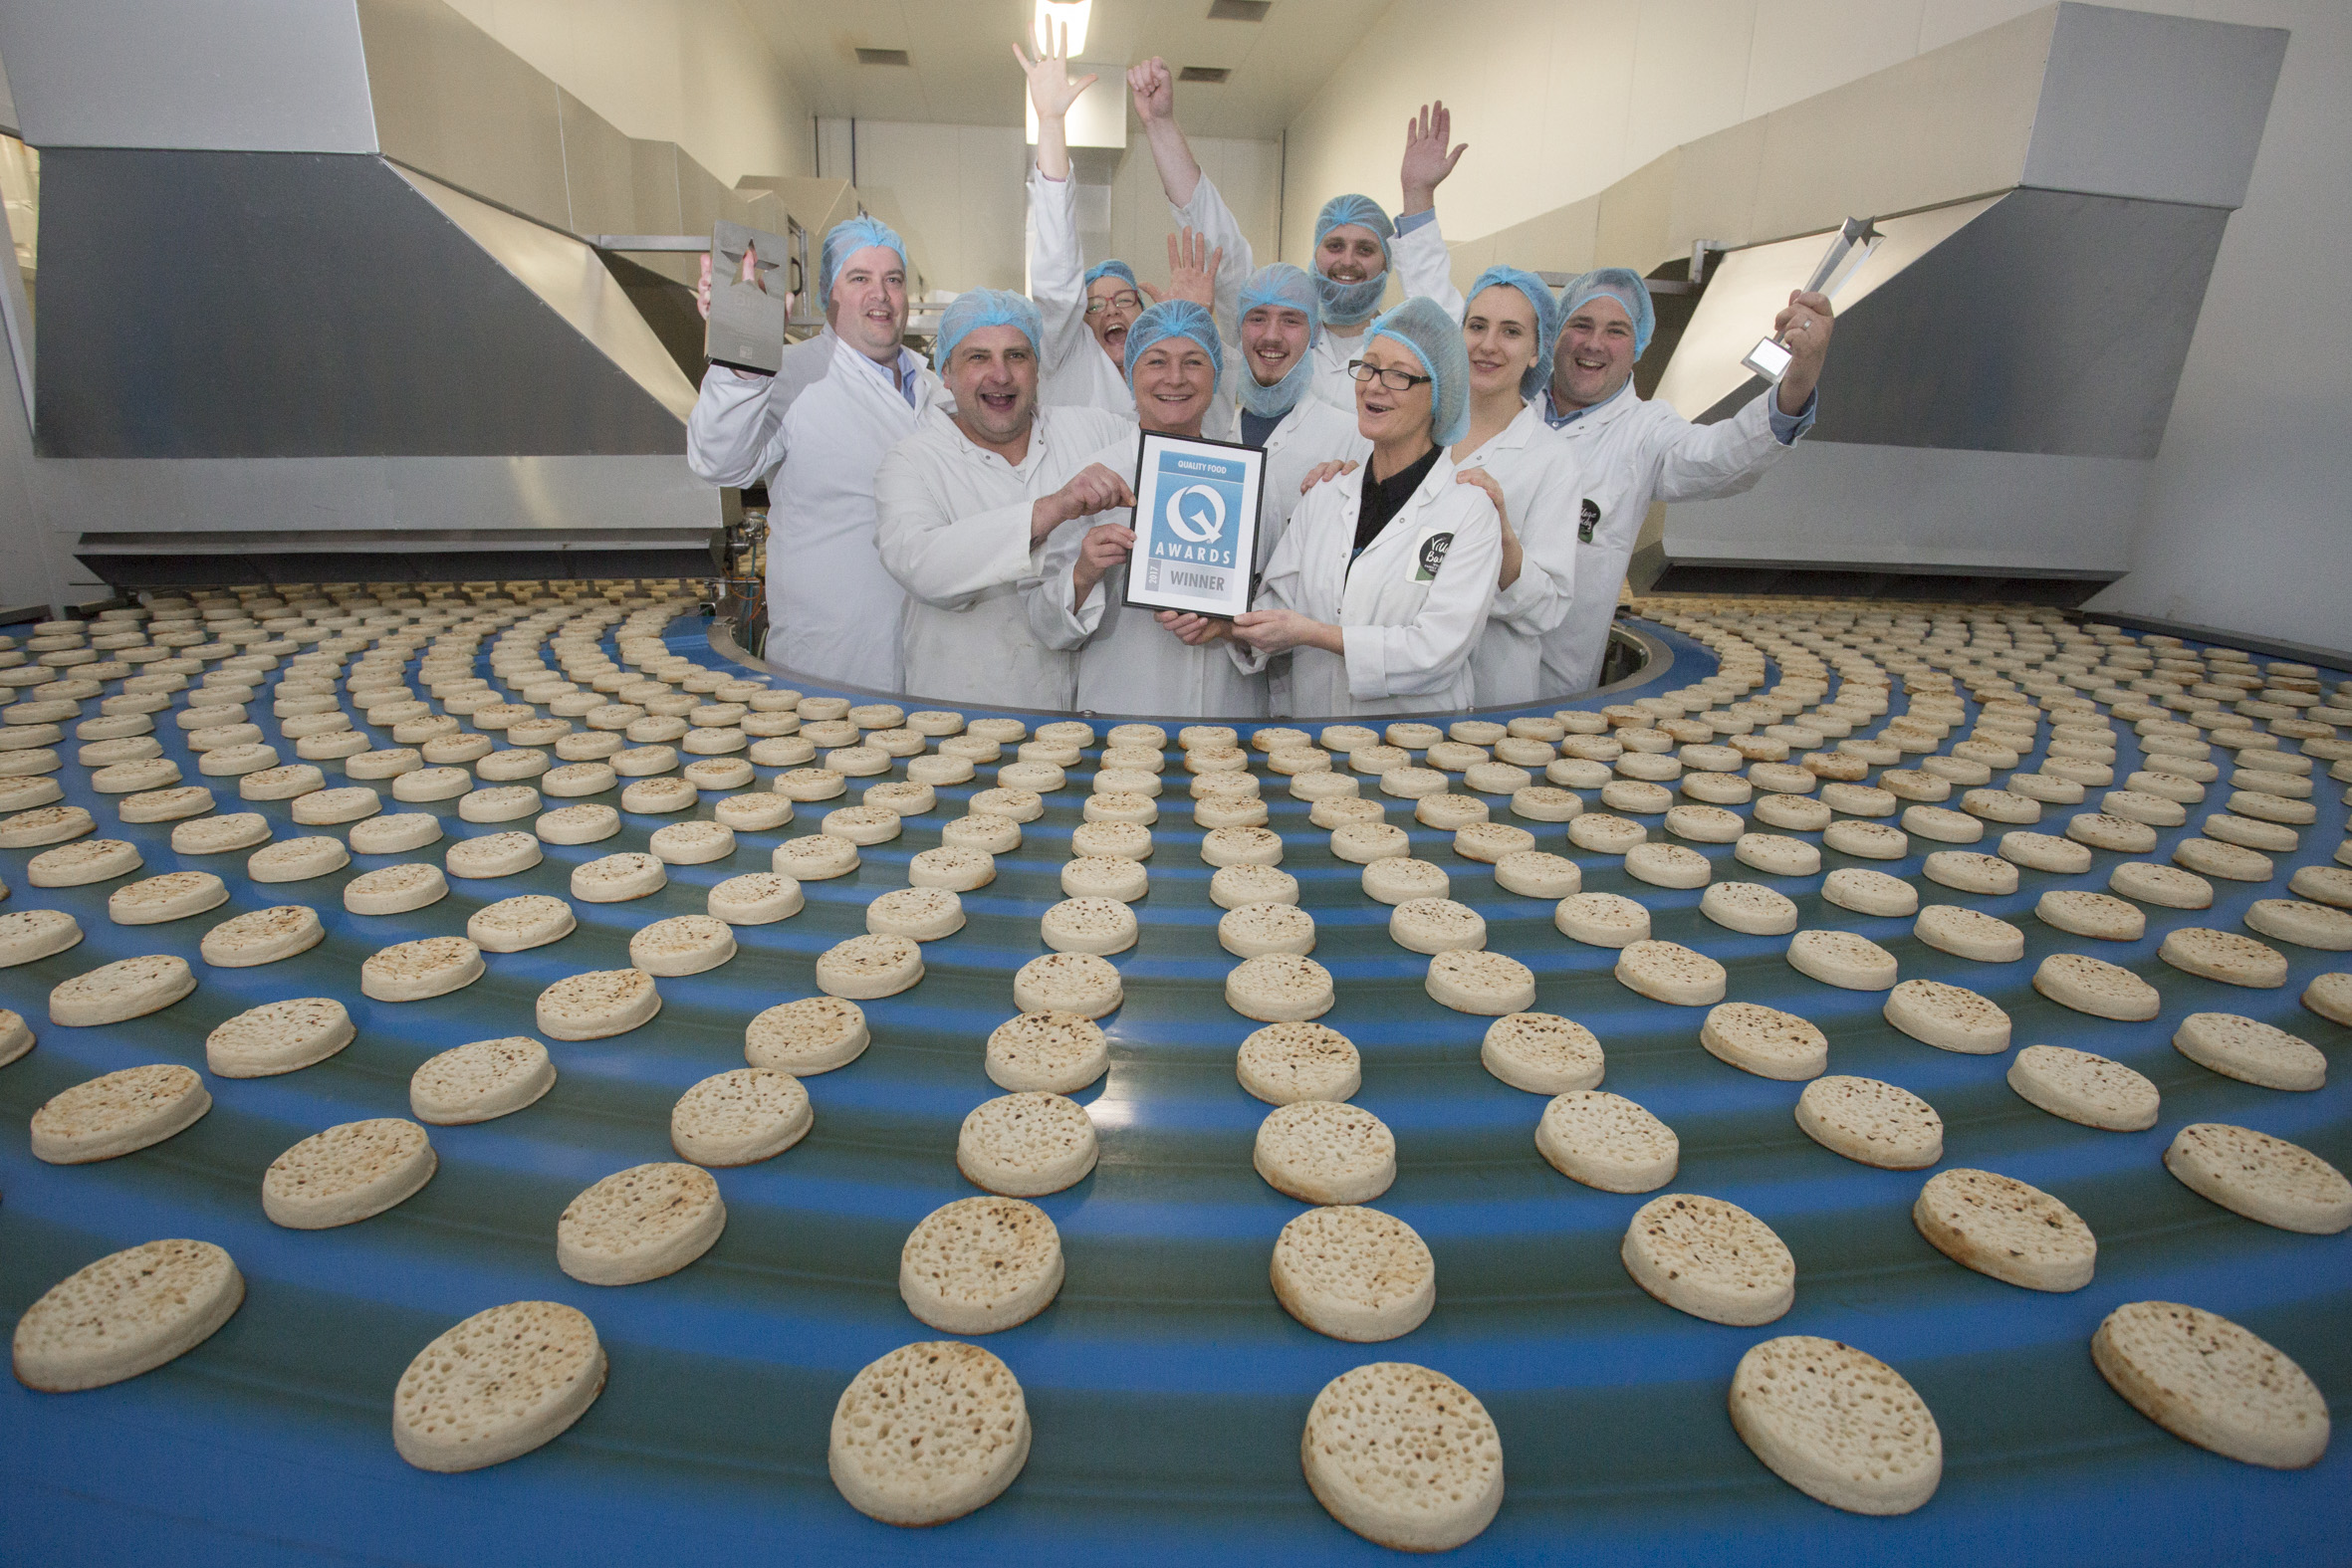 Bakery clinches nationwide Waitrose deal…and hat-trick of crumpet awards